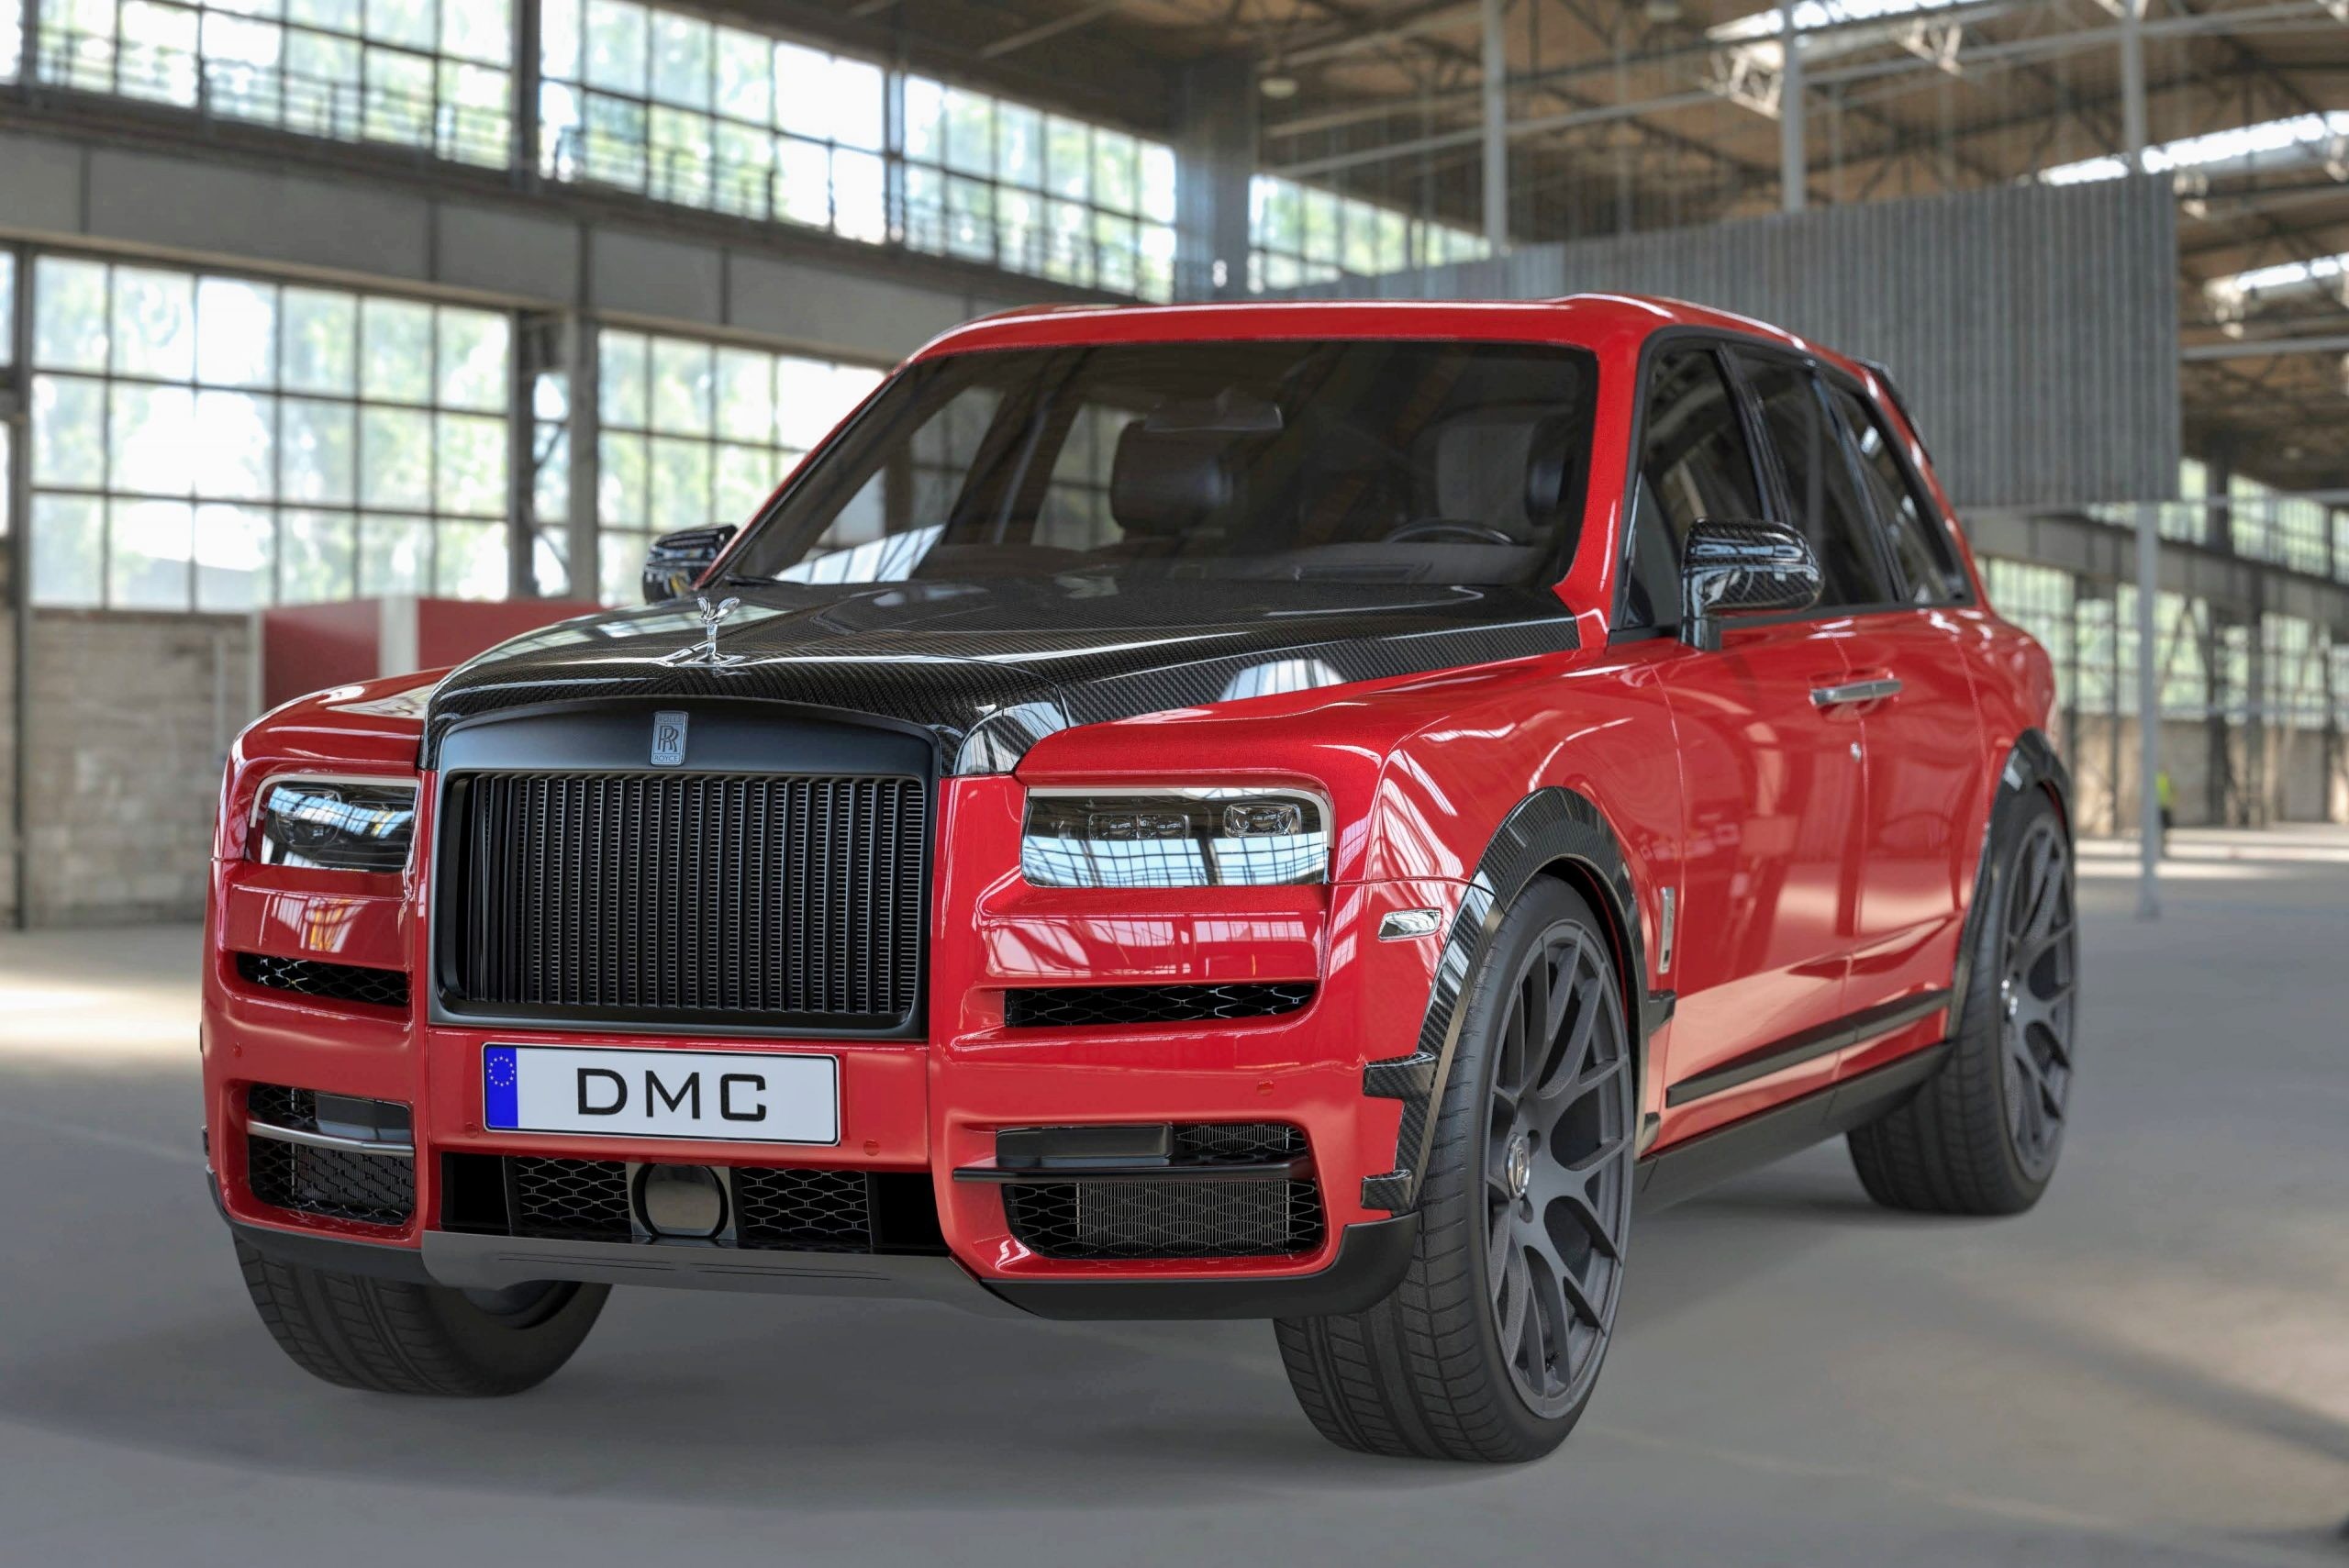 This Tuned Rolls-Royce Cullinan Is Emperor', Doesn't Look That Royal - autoevolution